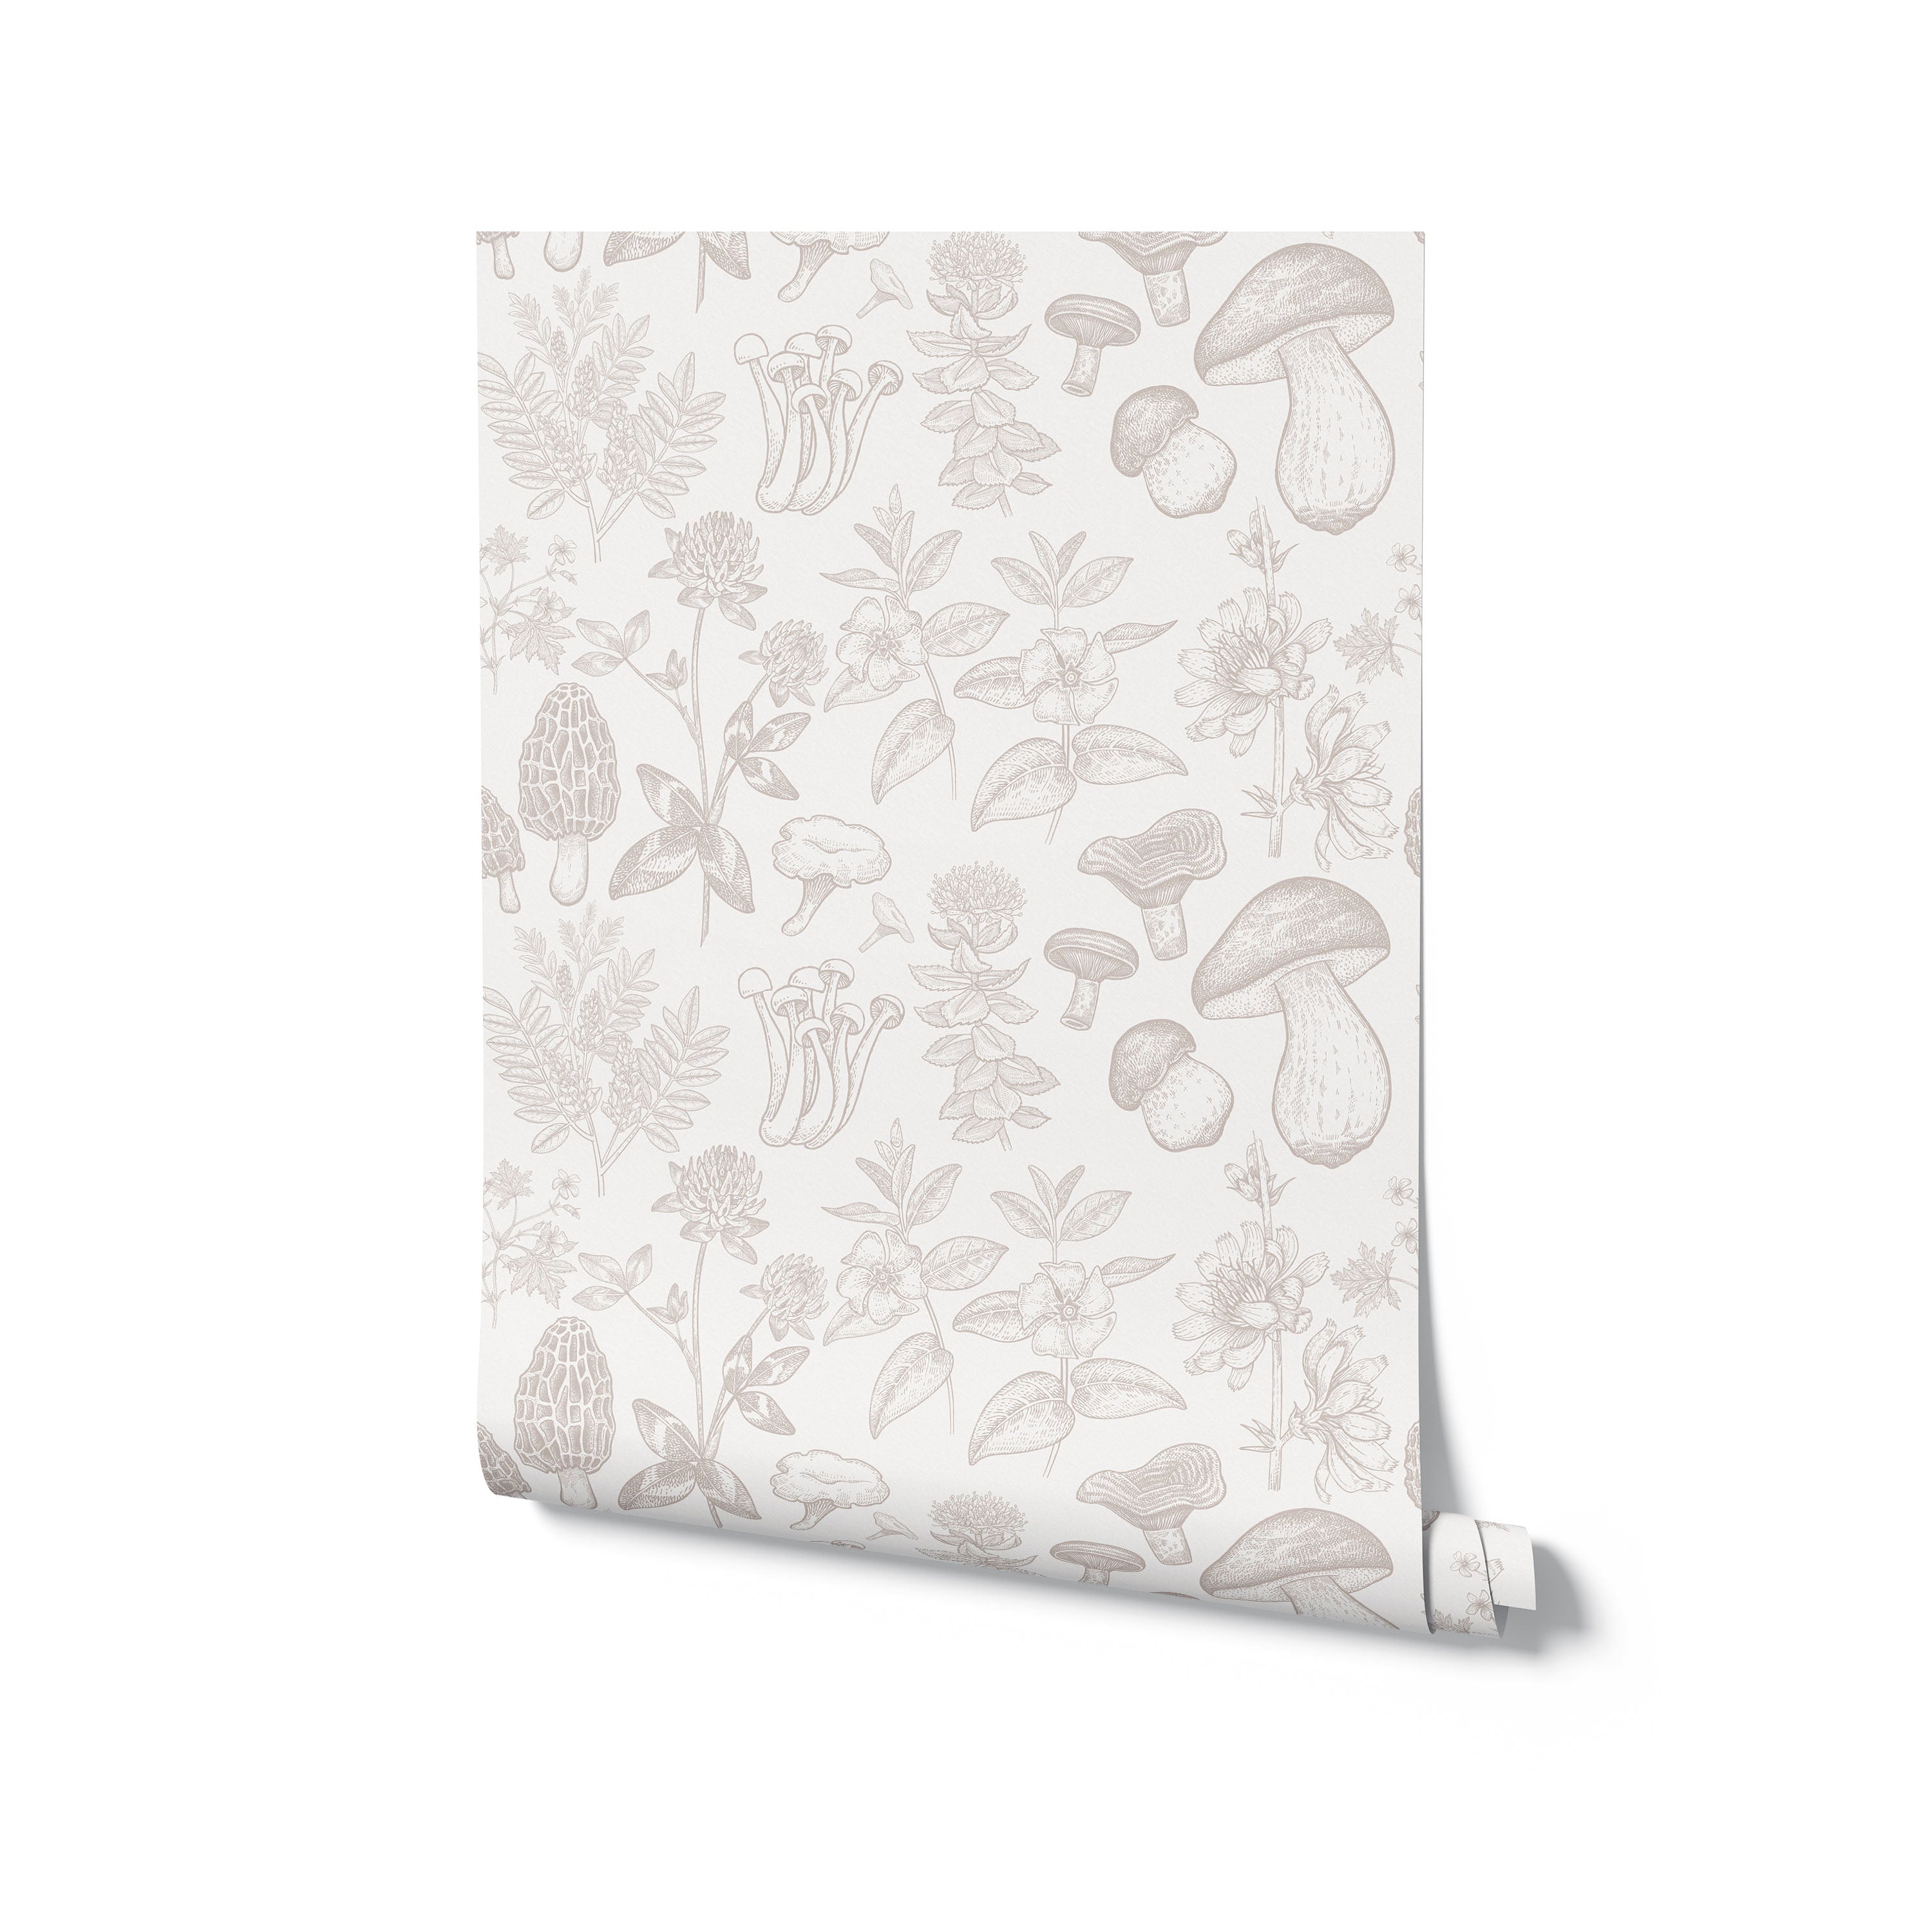 A roll of 'Mushroom Garden Wallpaper' is presented, highlighting the charming and detailed mushroom and plant illustrations that cover its surface. The beige and white color palette evokes a sense of calm and connection to nature.